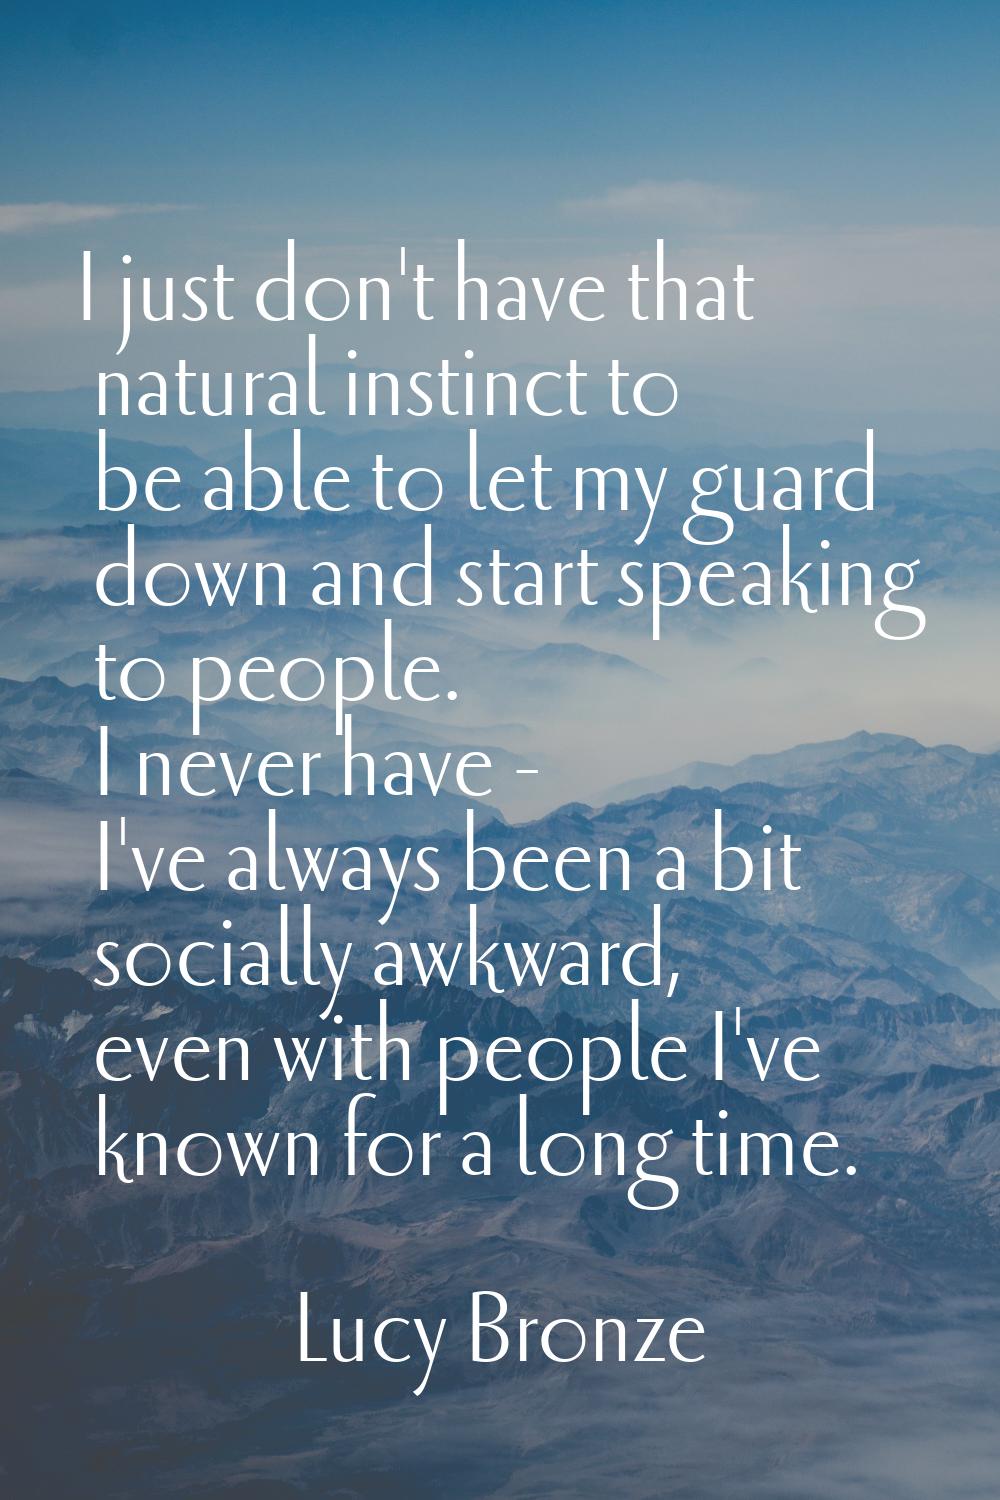 I just don't have that natural instinct to be able to let my guard down and start speaking to peopl